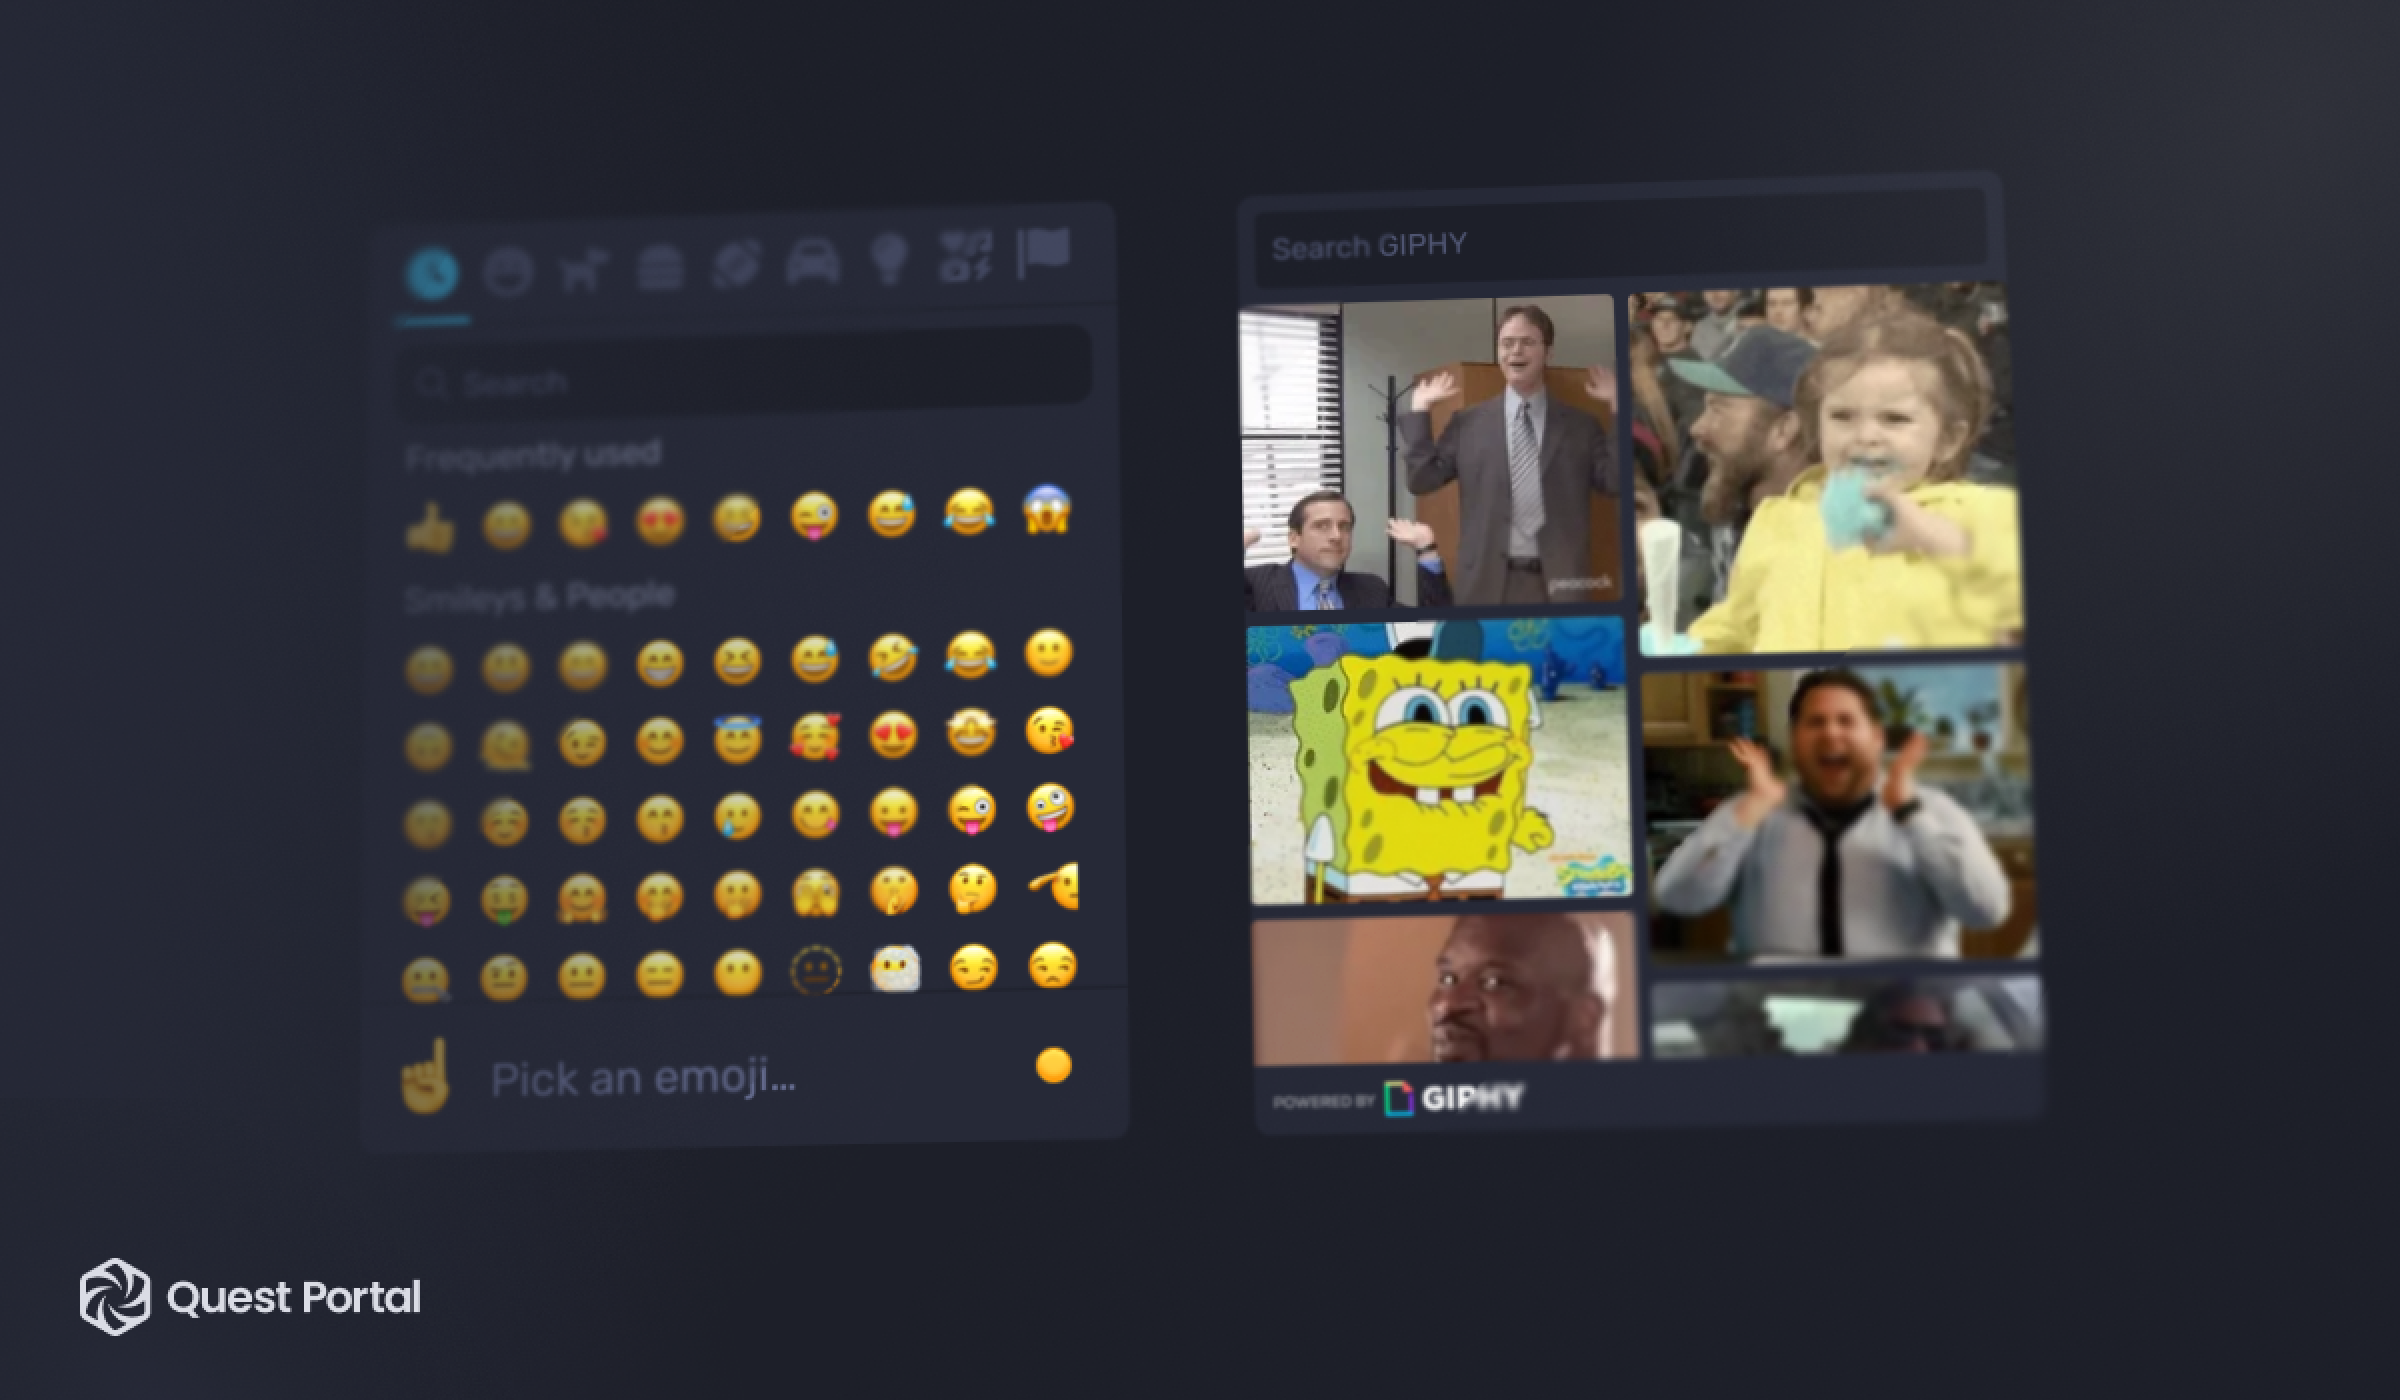 The emoji picker and GIF search in Quest Portal Chat. 